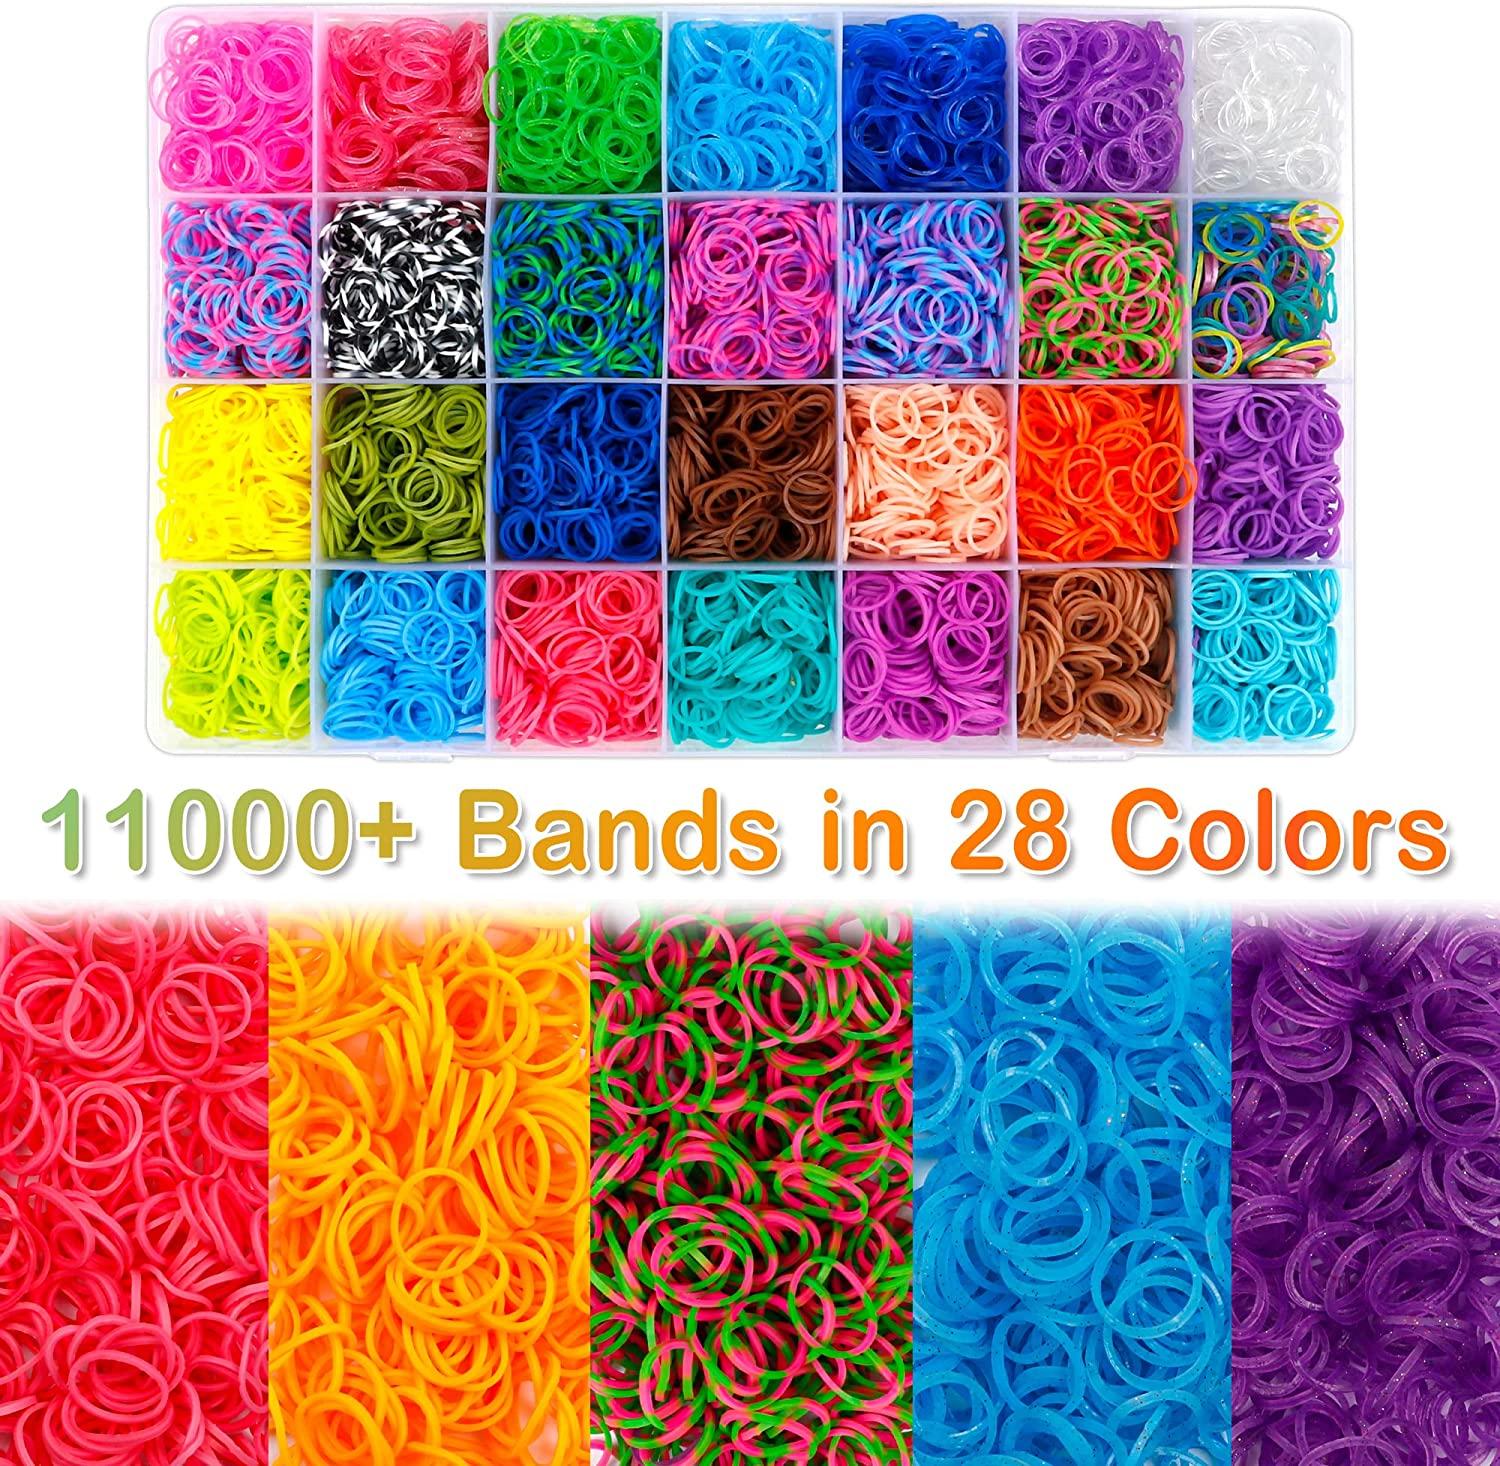 Inscraft 11880+ Loom Bands Set: Colorful Rubber Bands in 28 Colors with  Container, 600 Clips, 200 Beads, 52 ABC Beads, Premium Bracelet Making  Refill